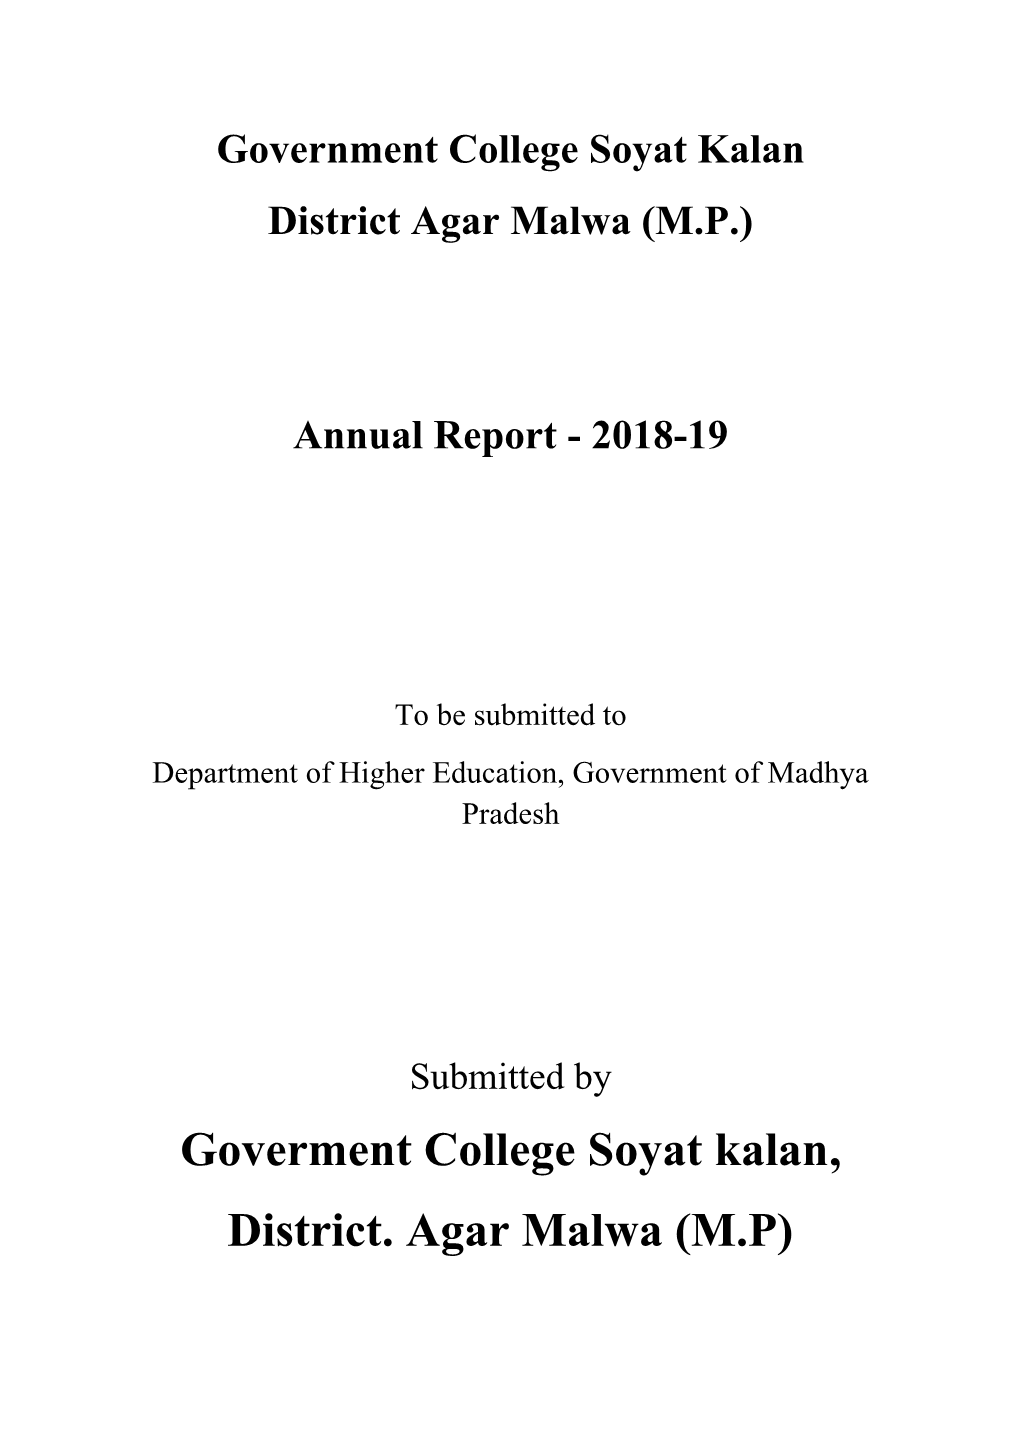 Government College Soyat Kalan District Agar Malwa (MP) Annual Report